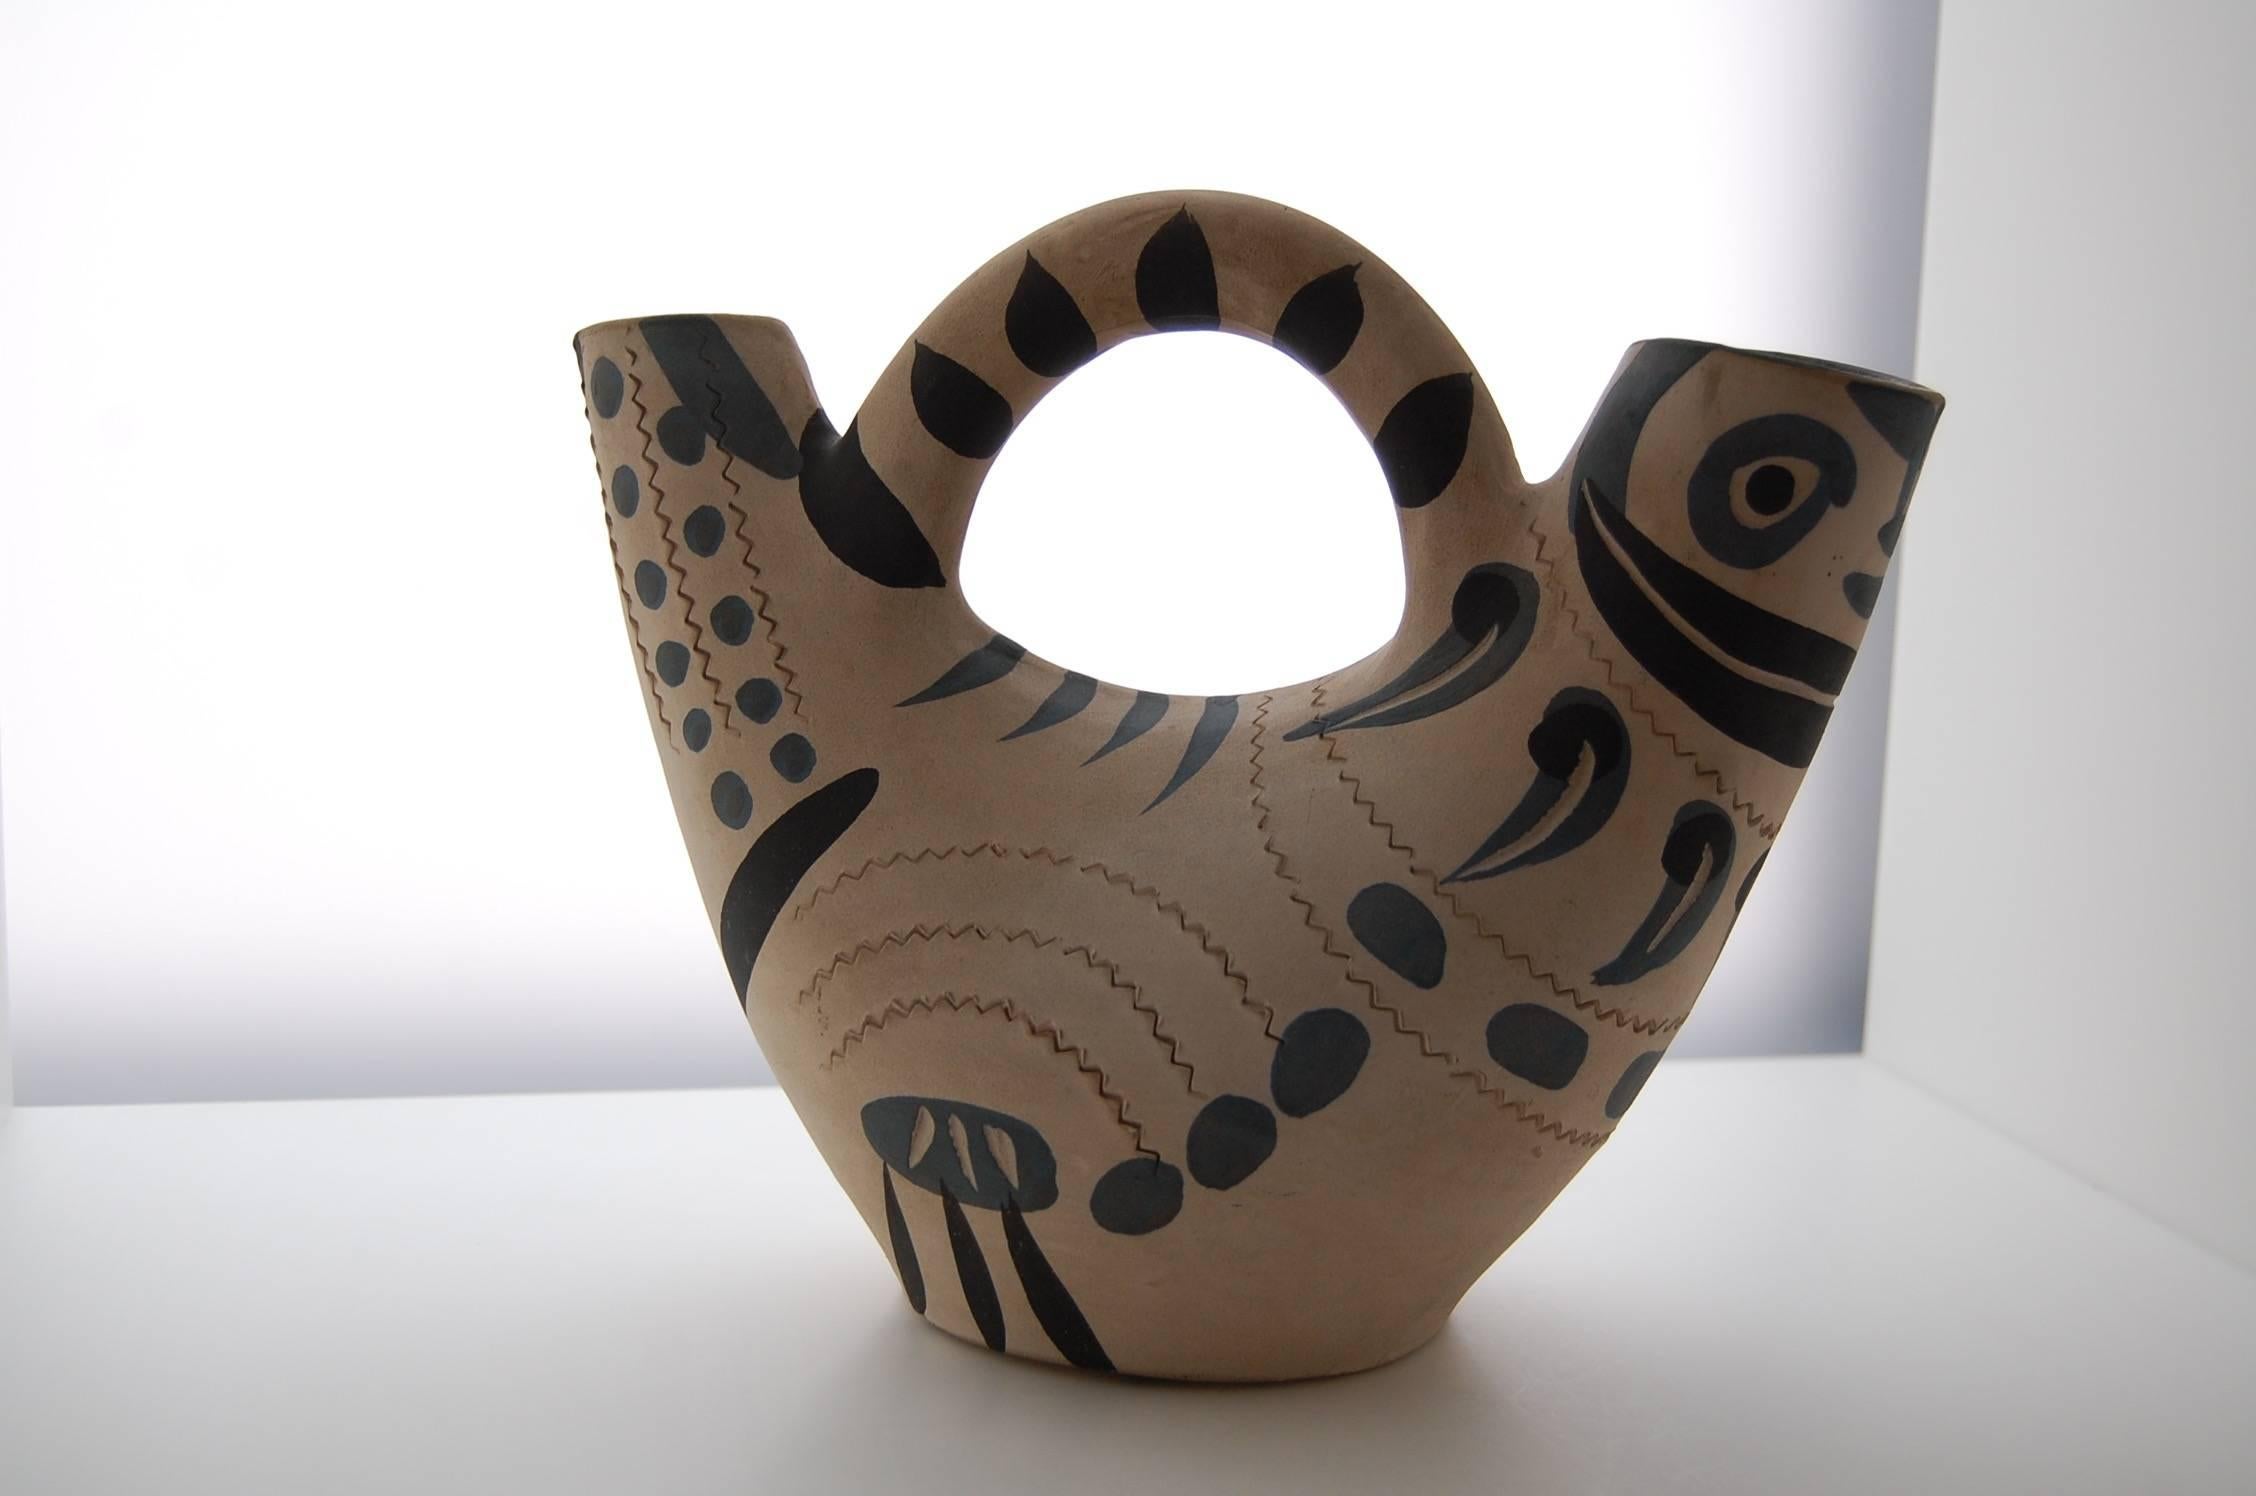 This big ceramic pitcher was designed by Pablo Picasso (1881-1973) in 1954. The Madoura workshop of Georges and Suzanne Ramie were executing these dramatic new ceramic designs which renewed the pottery making craft in the whole village of Vallauris